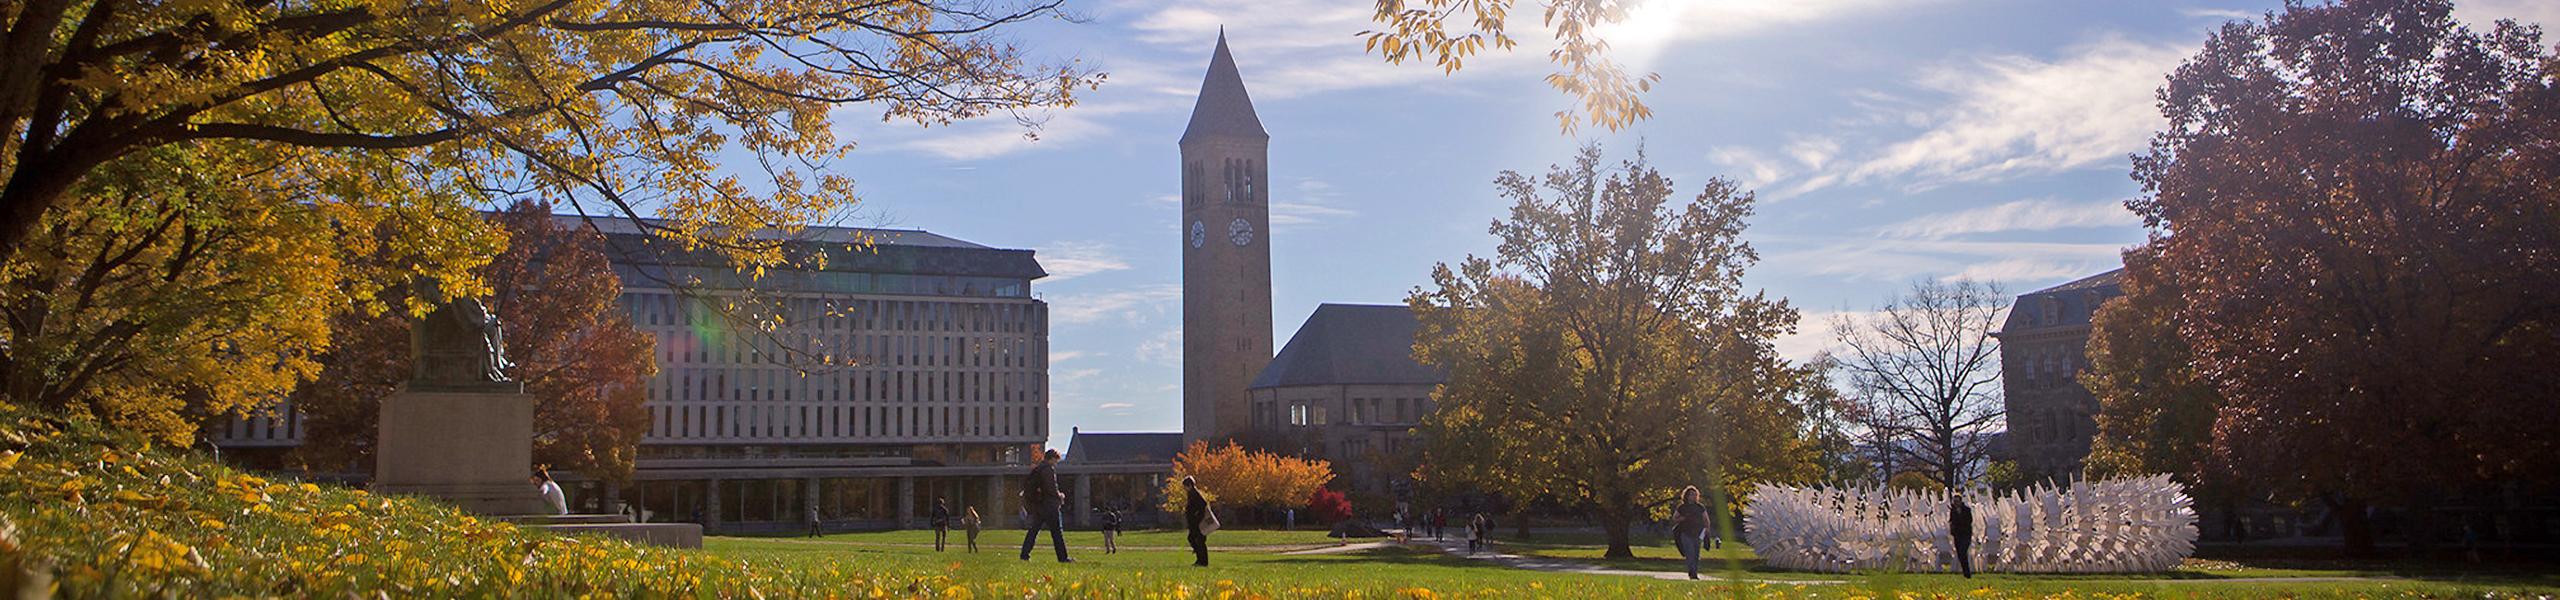 Cornell Campus in the Fall, with McGraw Tower as the focus